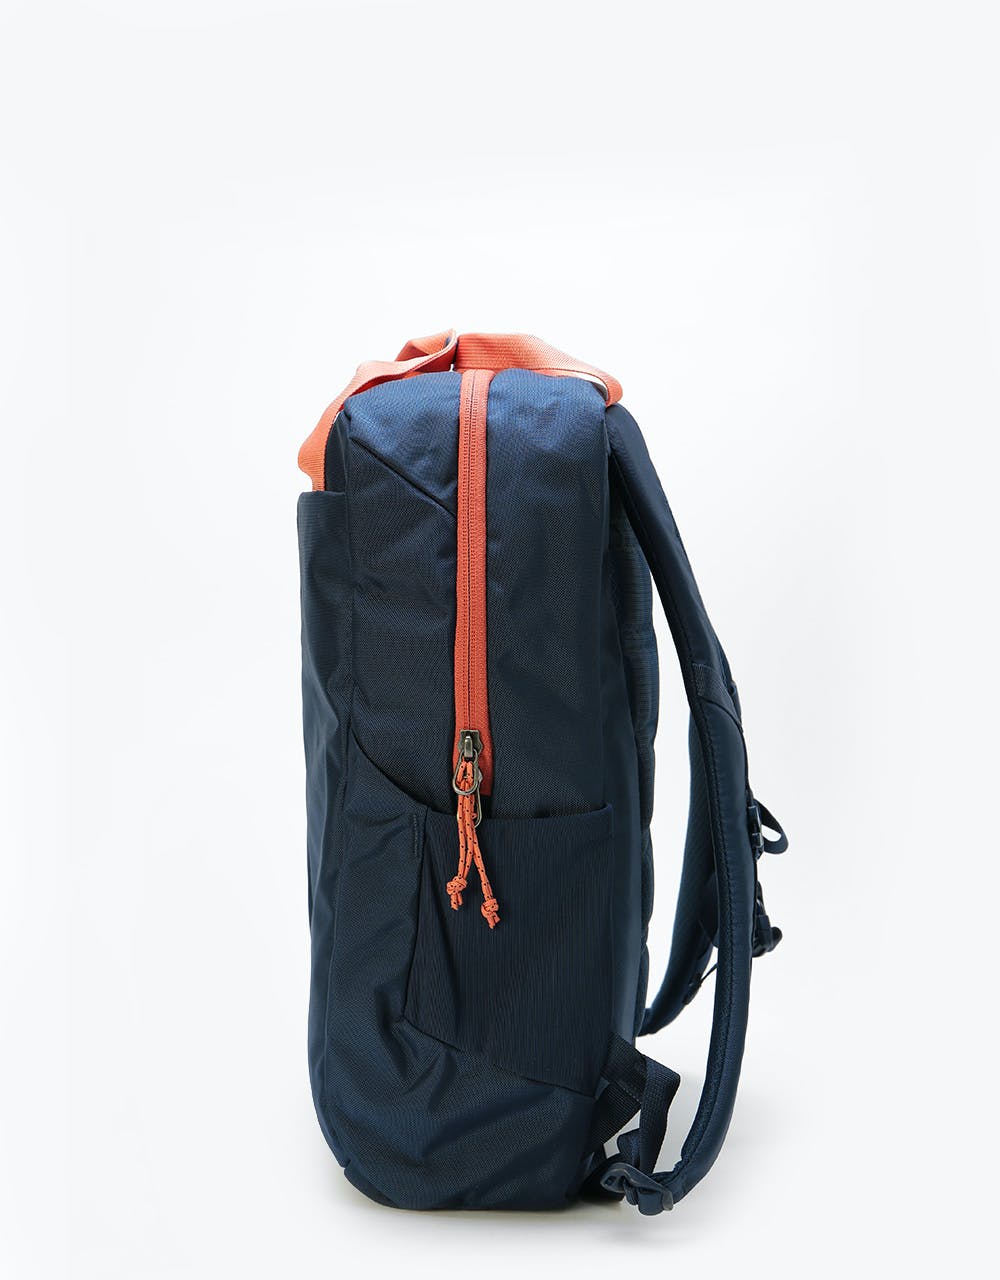 Patagonia Tamango Pack 20L Backpack - Classic Navy/Mellow Melon